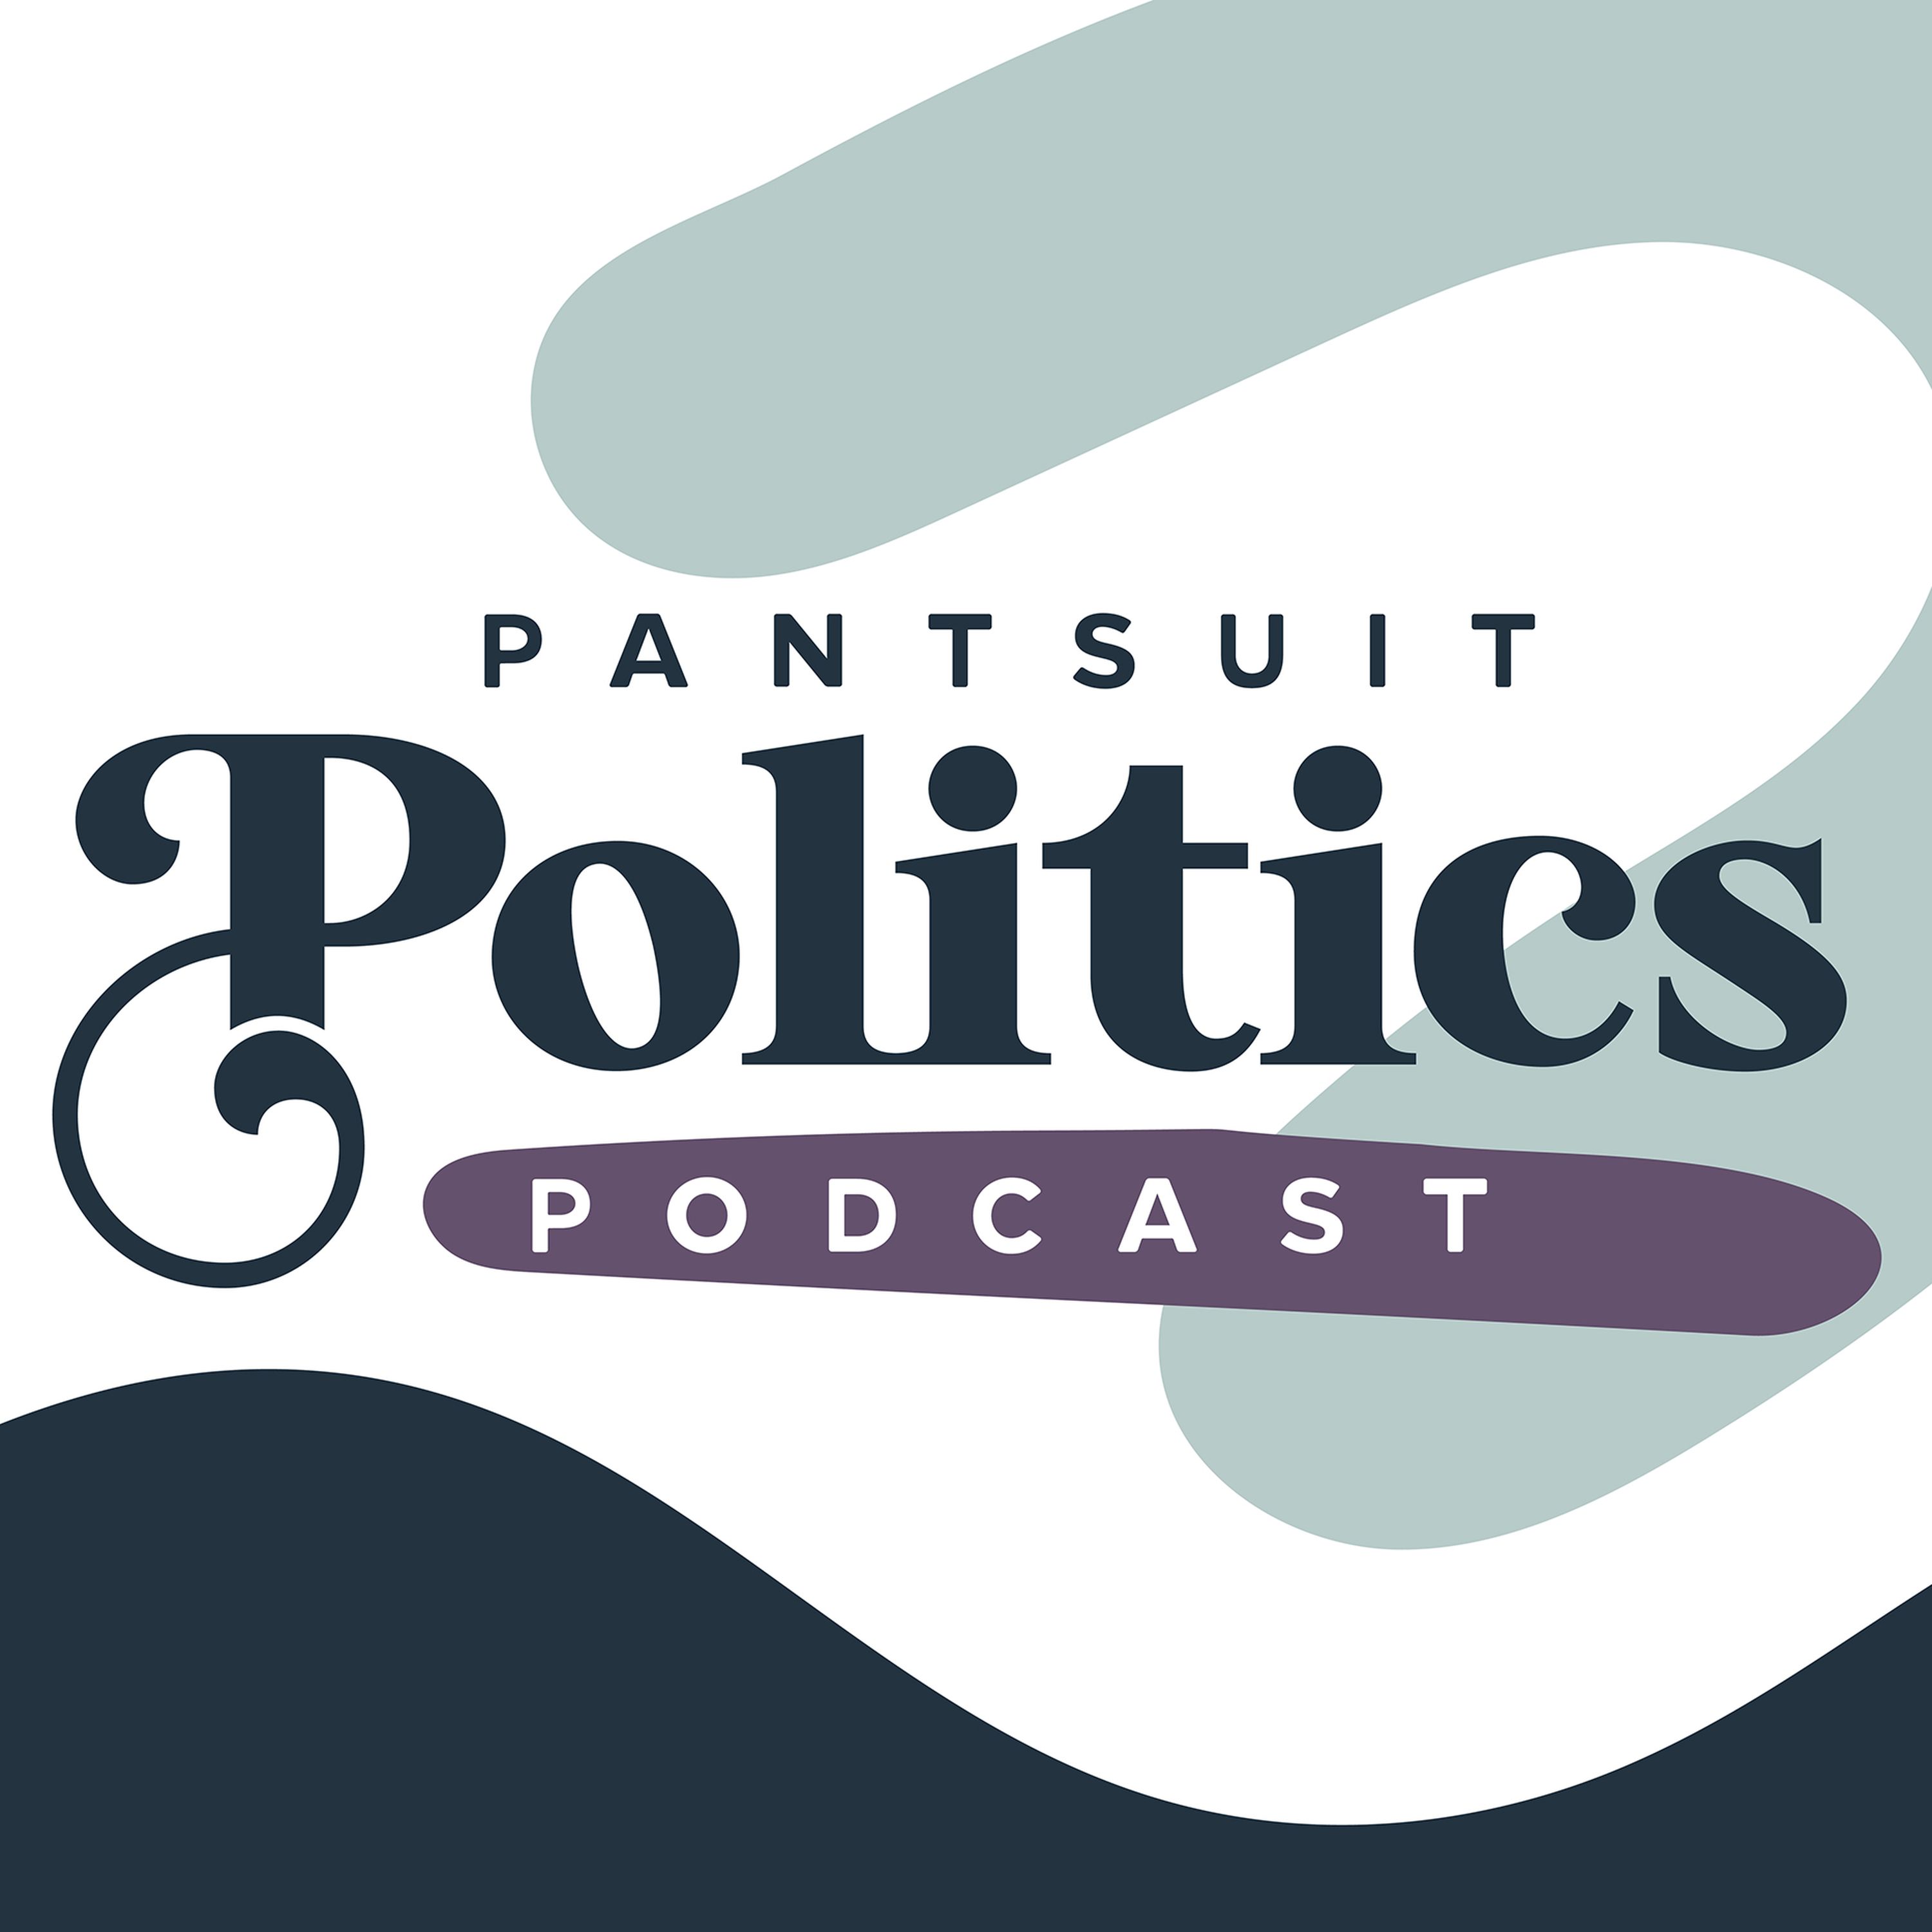 Beto, Manafort, the College Admissions Scandal, and Understanding Antisemitism (with Deborah Lipstadt)